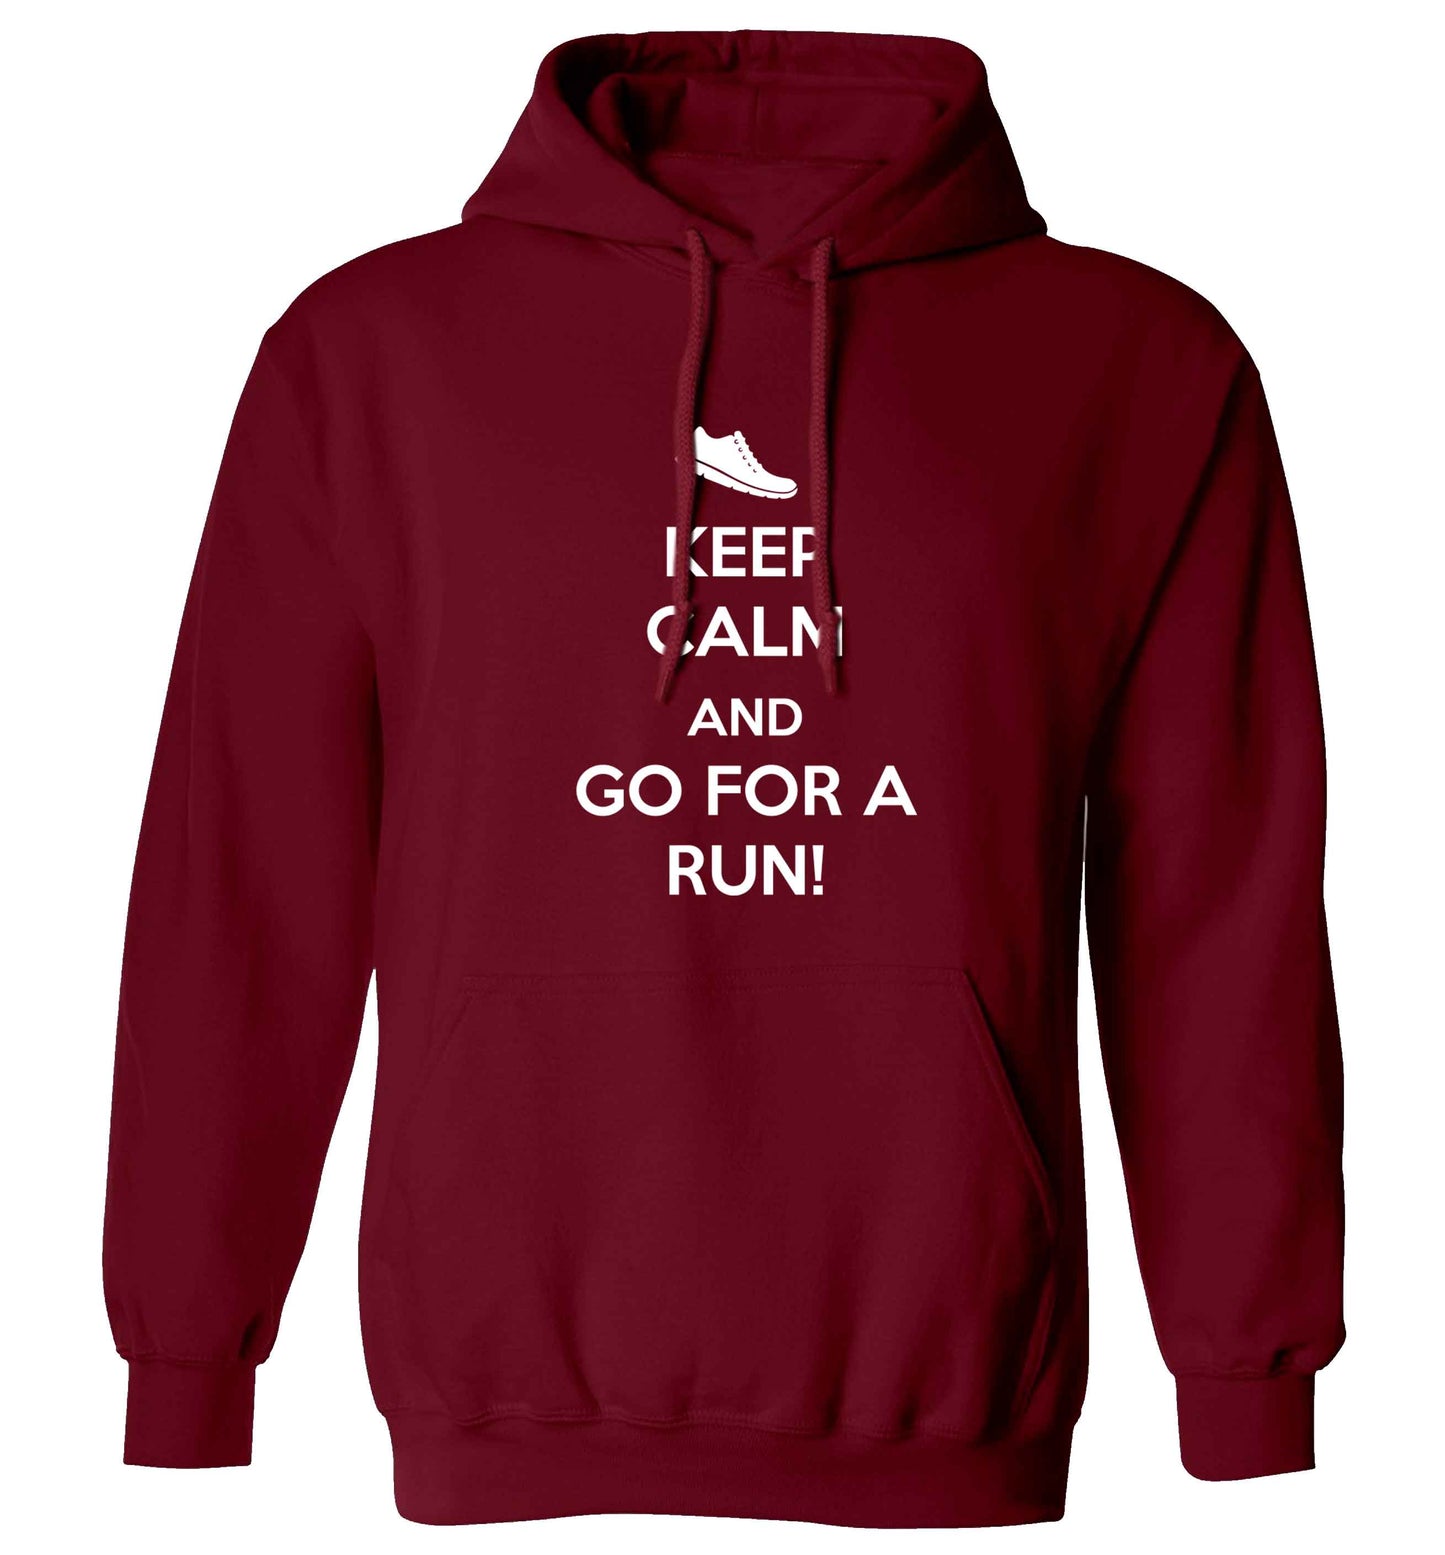 Keep calm and go for a run adults unisex maroon hoodie 2XL